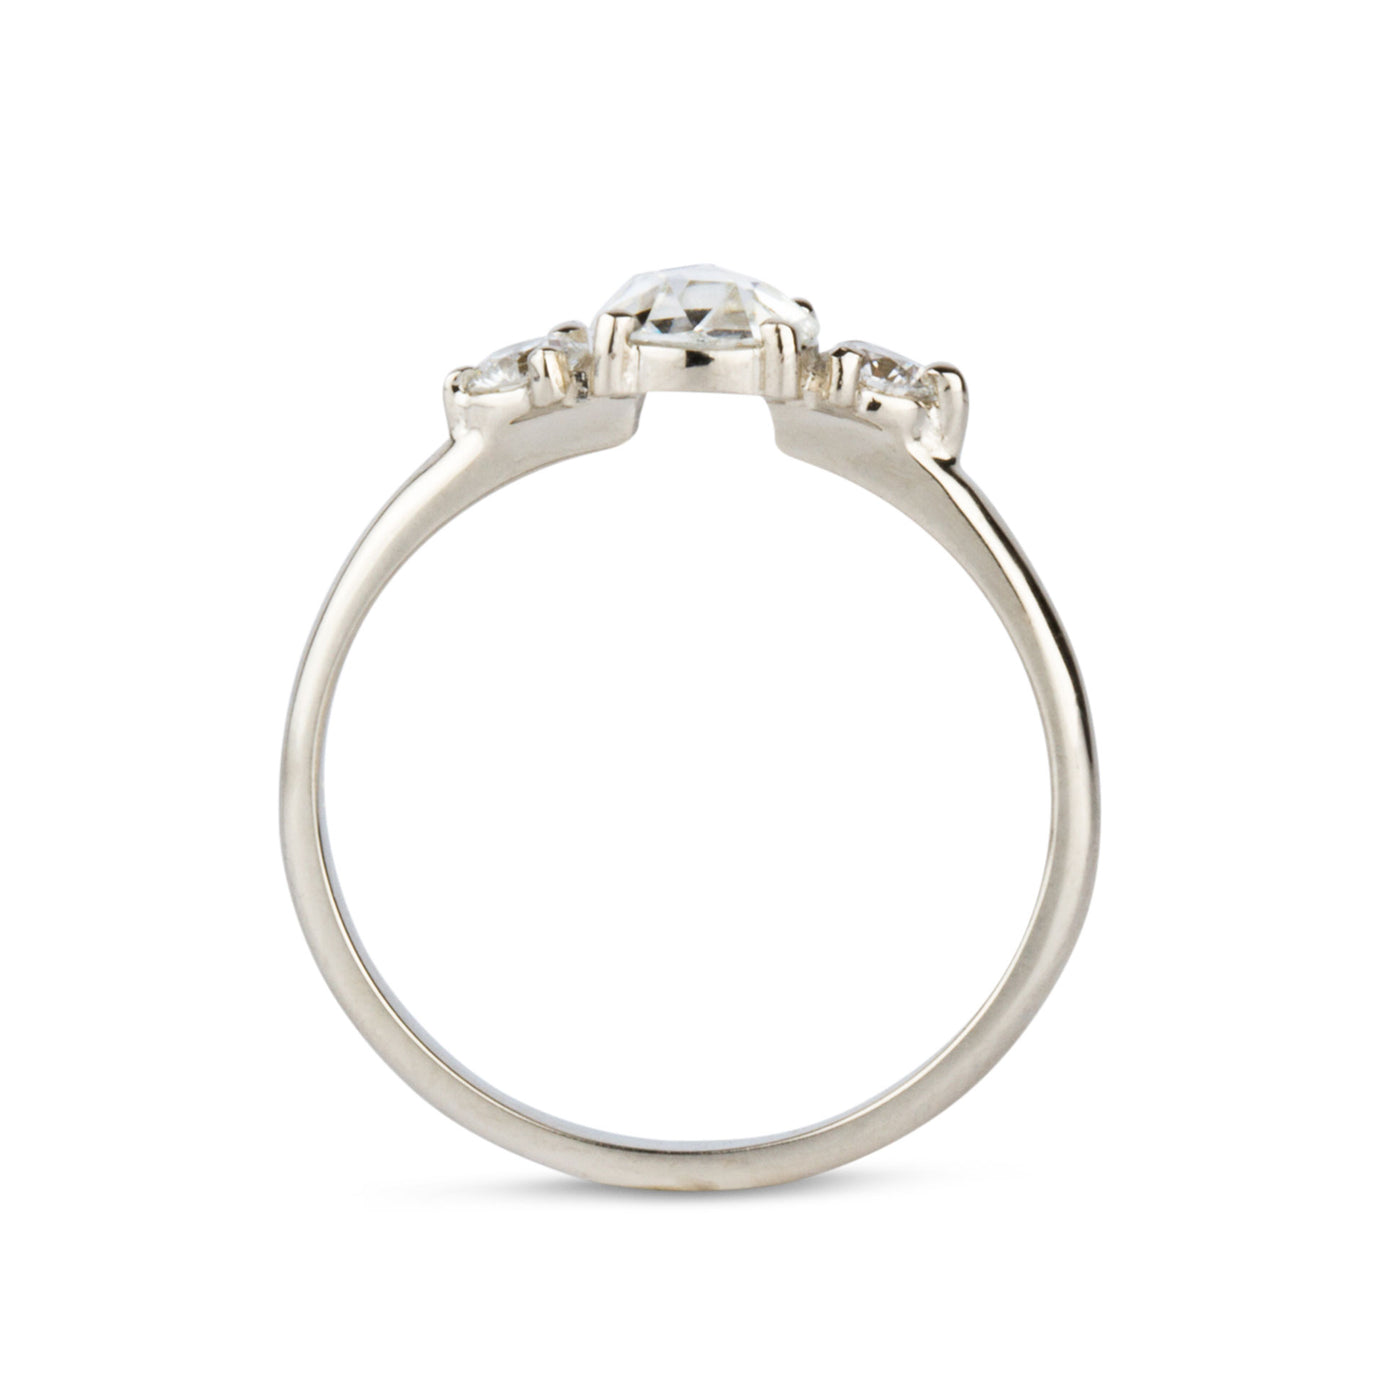 Rose Cut White Diamond Lenox Ring in White Gold profile view on a white background by Corey Egan